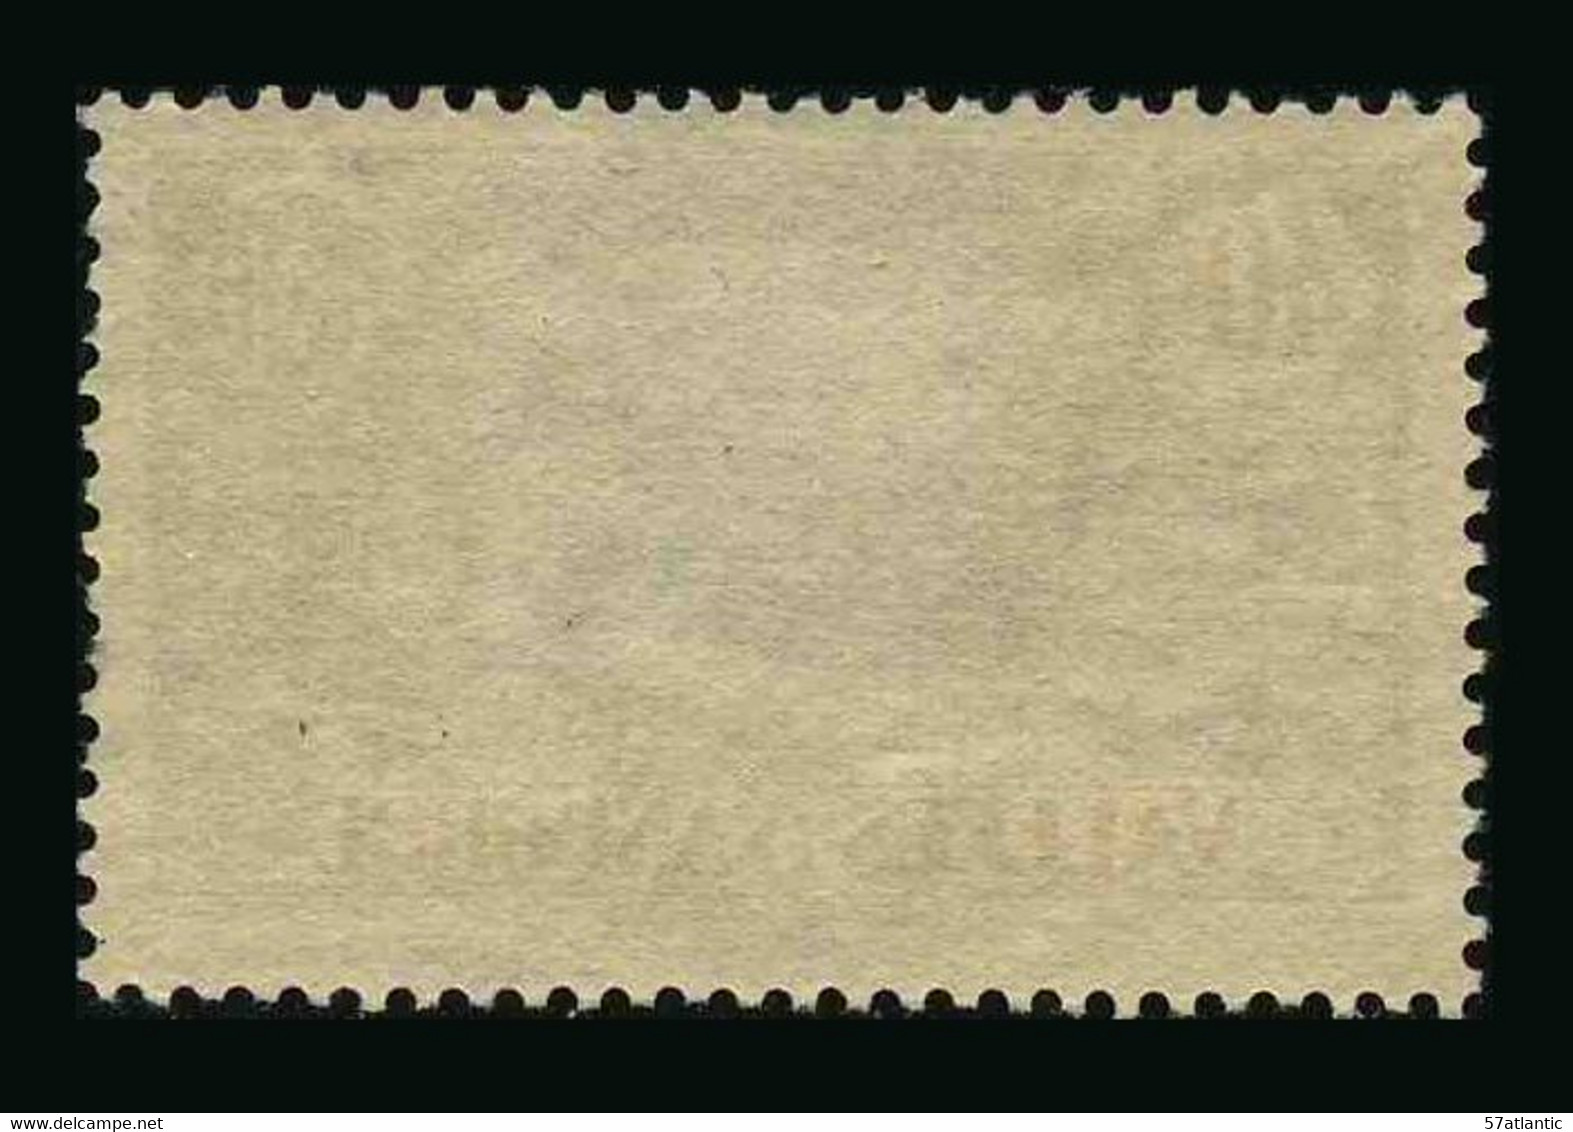 ANDORRE FRANCAIS - YT 33 - TIMBRE OBLITERE - Used Stamps